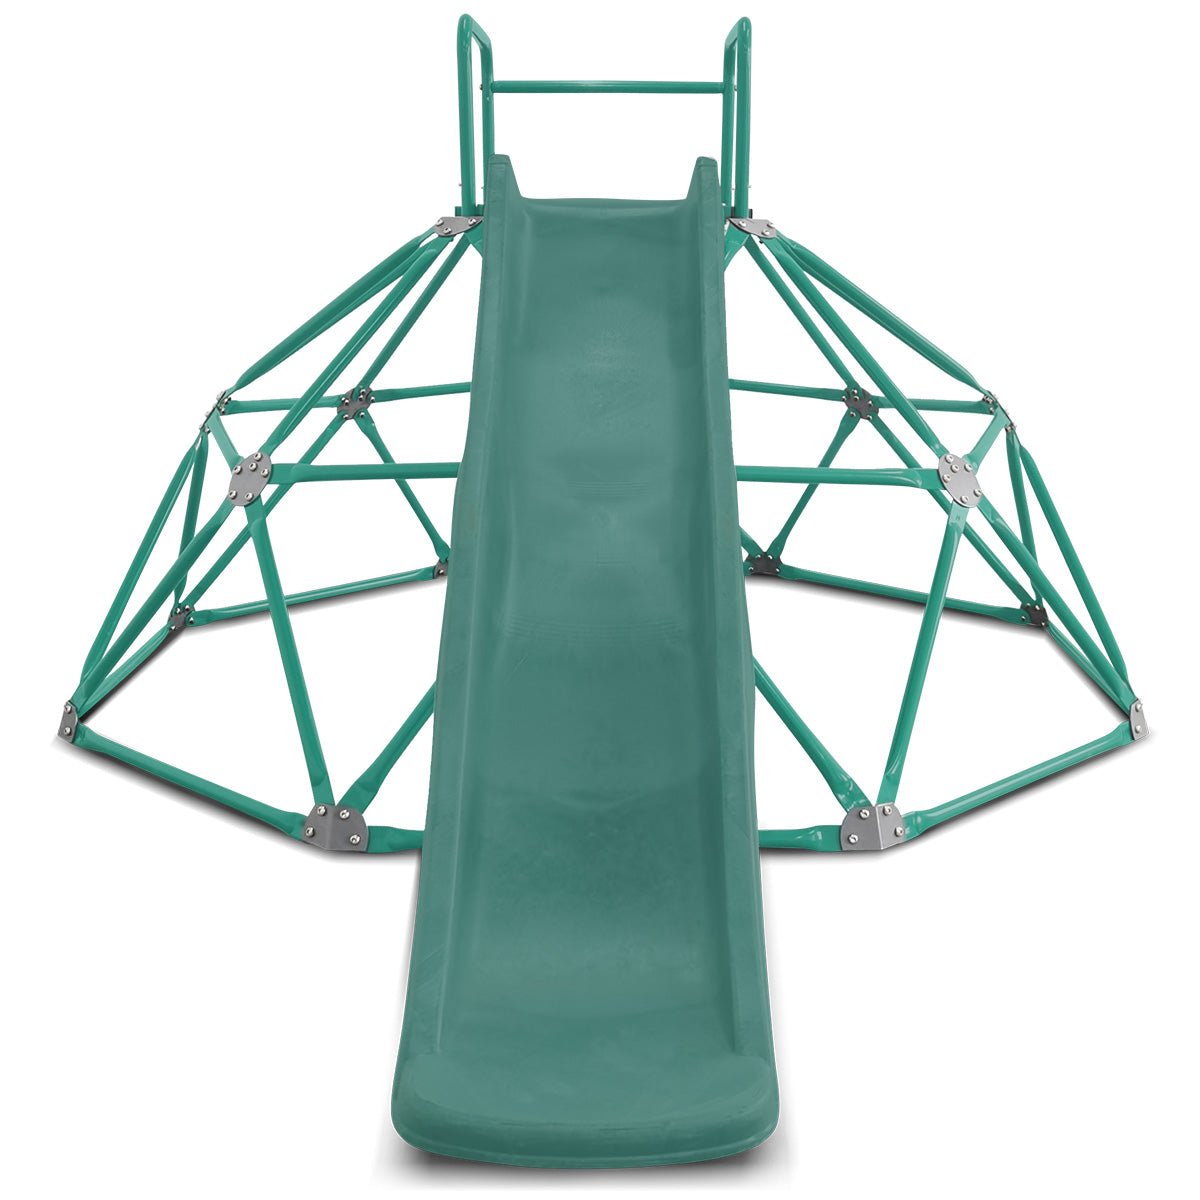 Lifespan Kids Summit Dome Climber with 1.8m Slide: Active Playtime Adventure